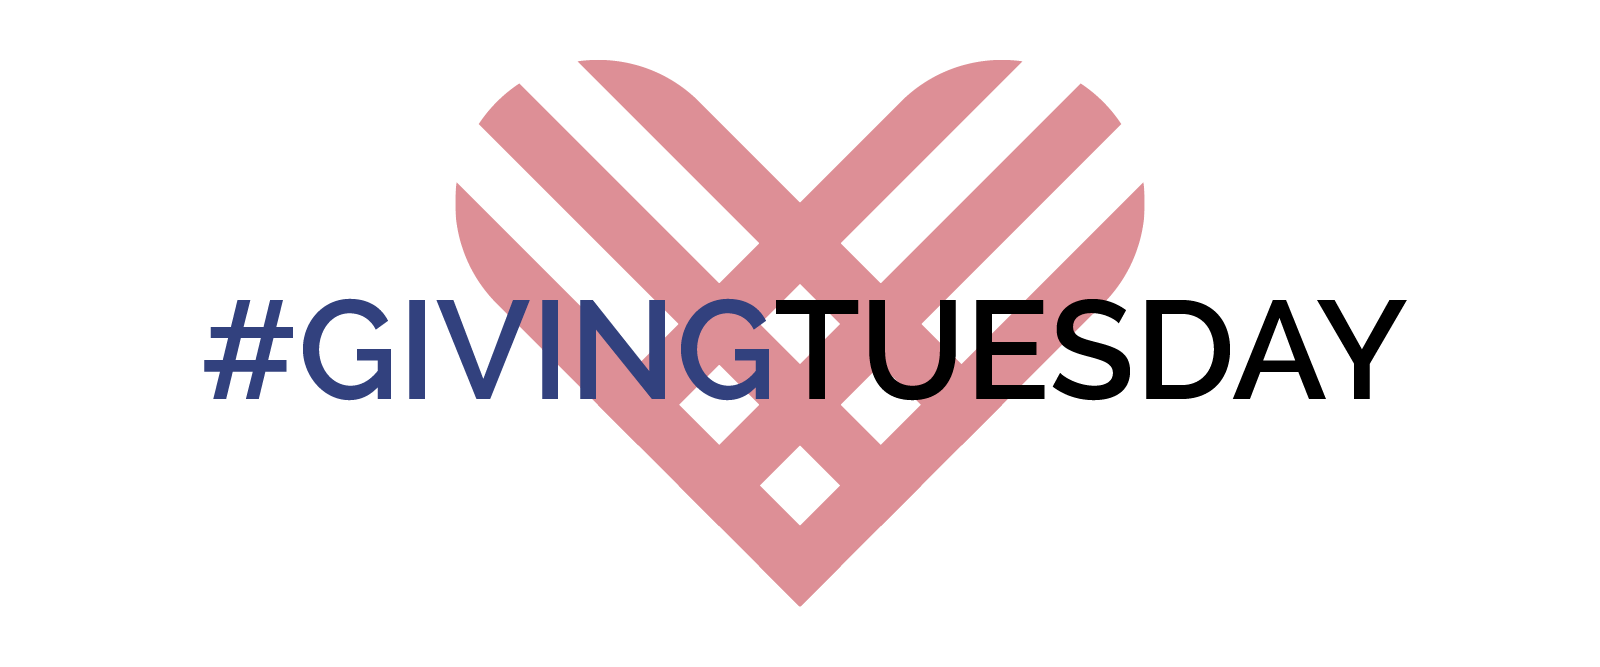 12 Nonprofits to Support this #GivingTuesday.